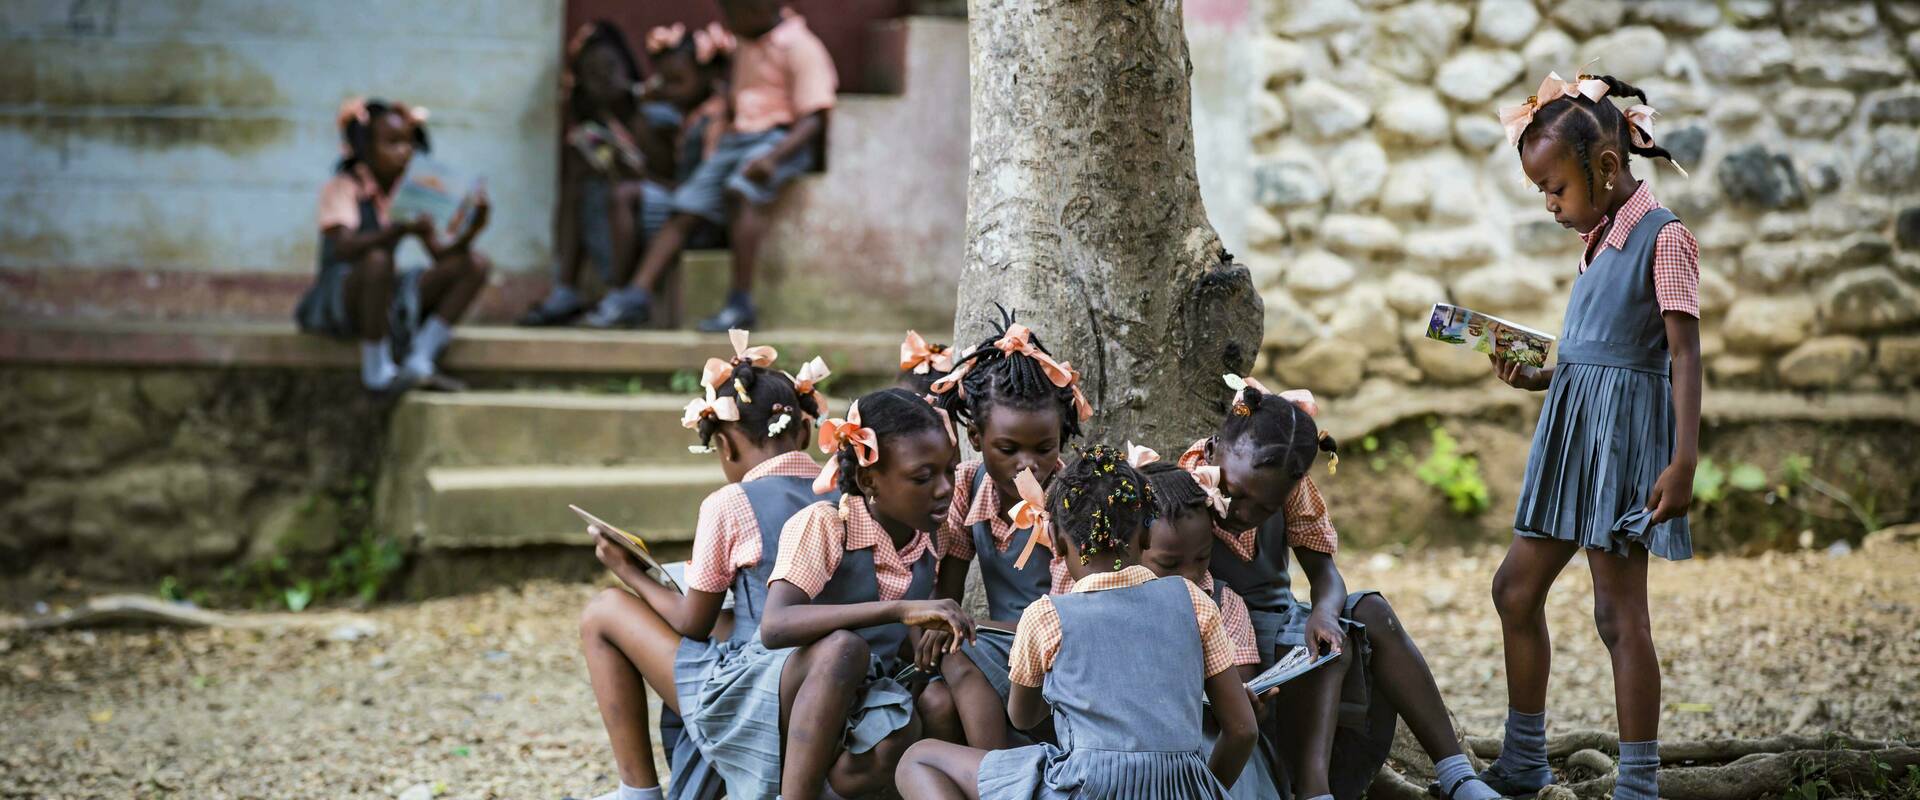 Students in Haiti reading books under a tree